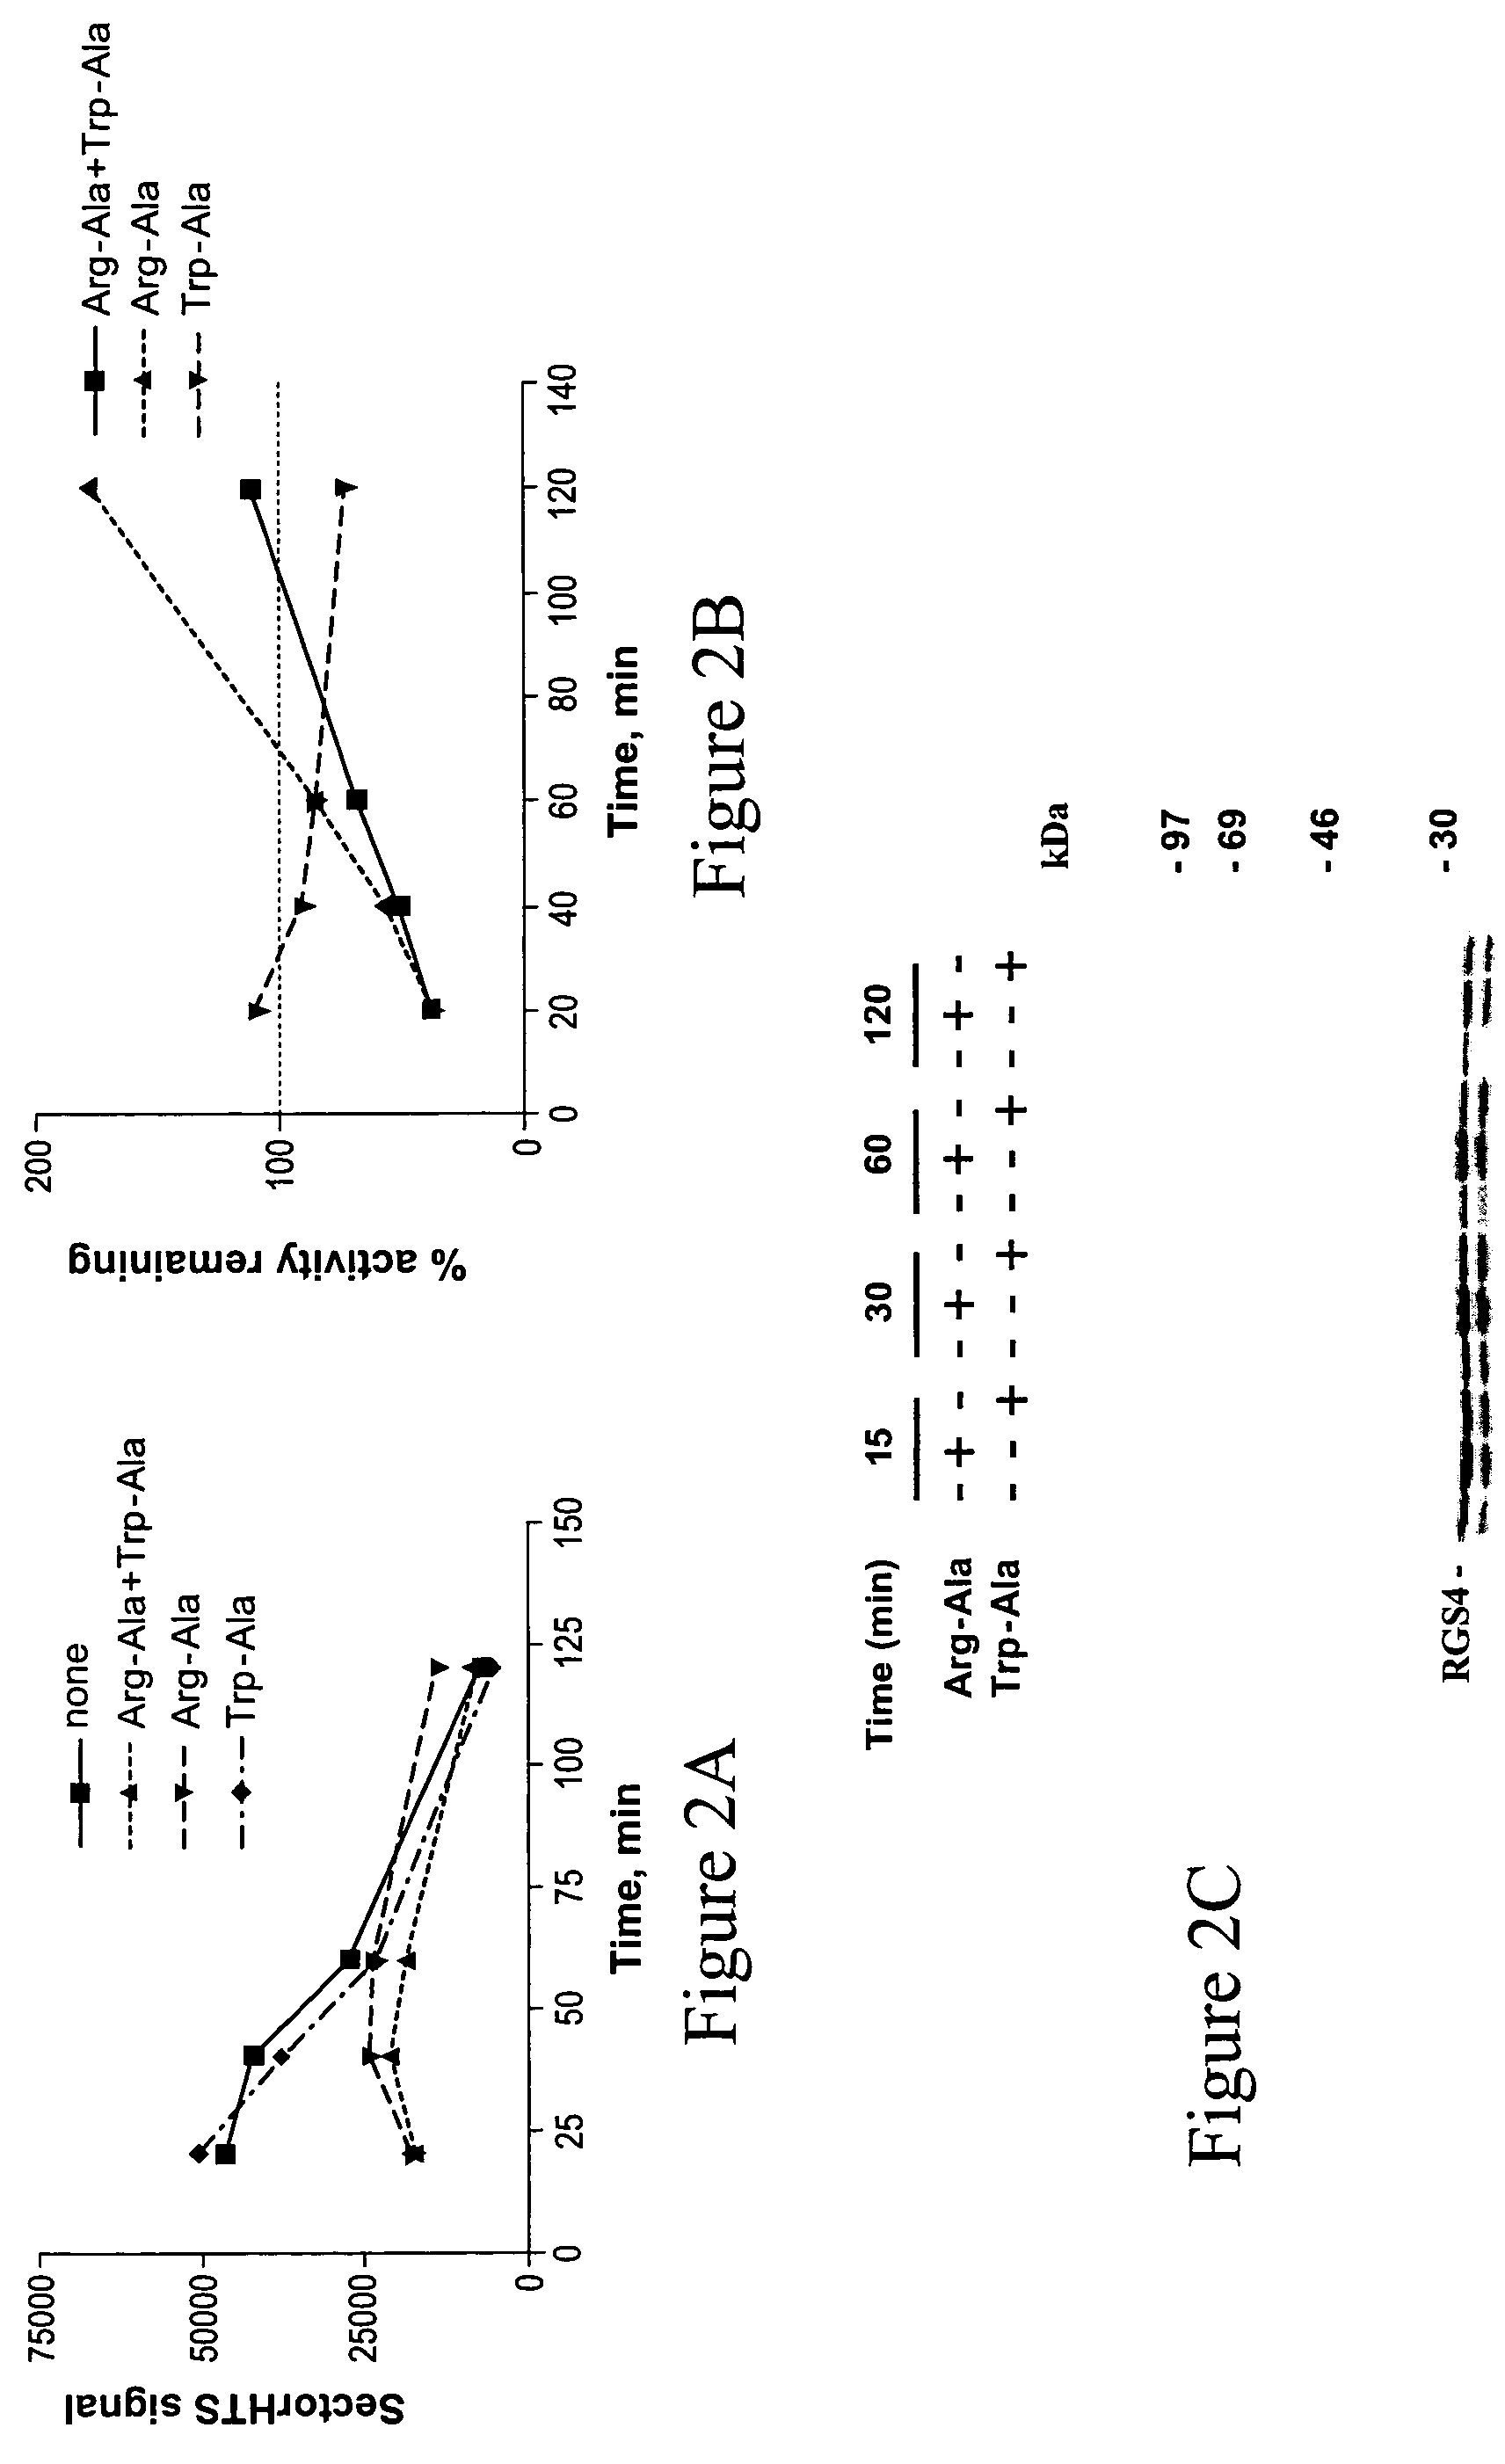 Substrates of N-end rule ubiquitylation and methods for measuring the ubiquitylation of these substrates